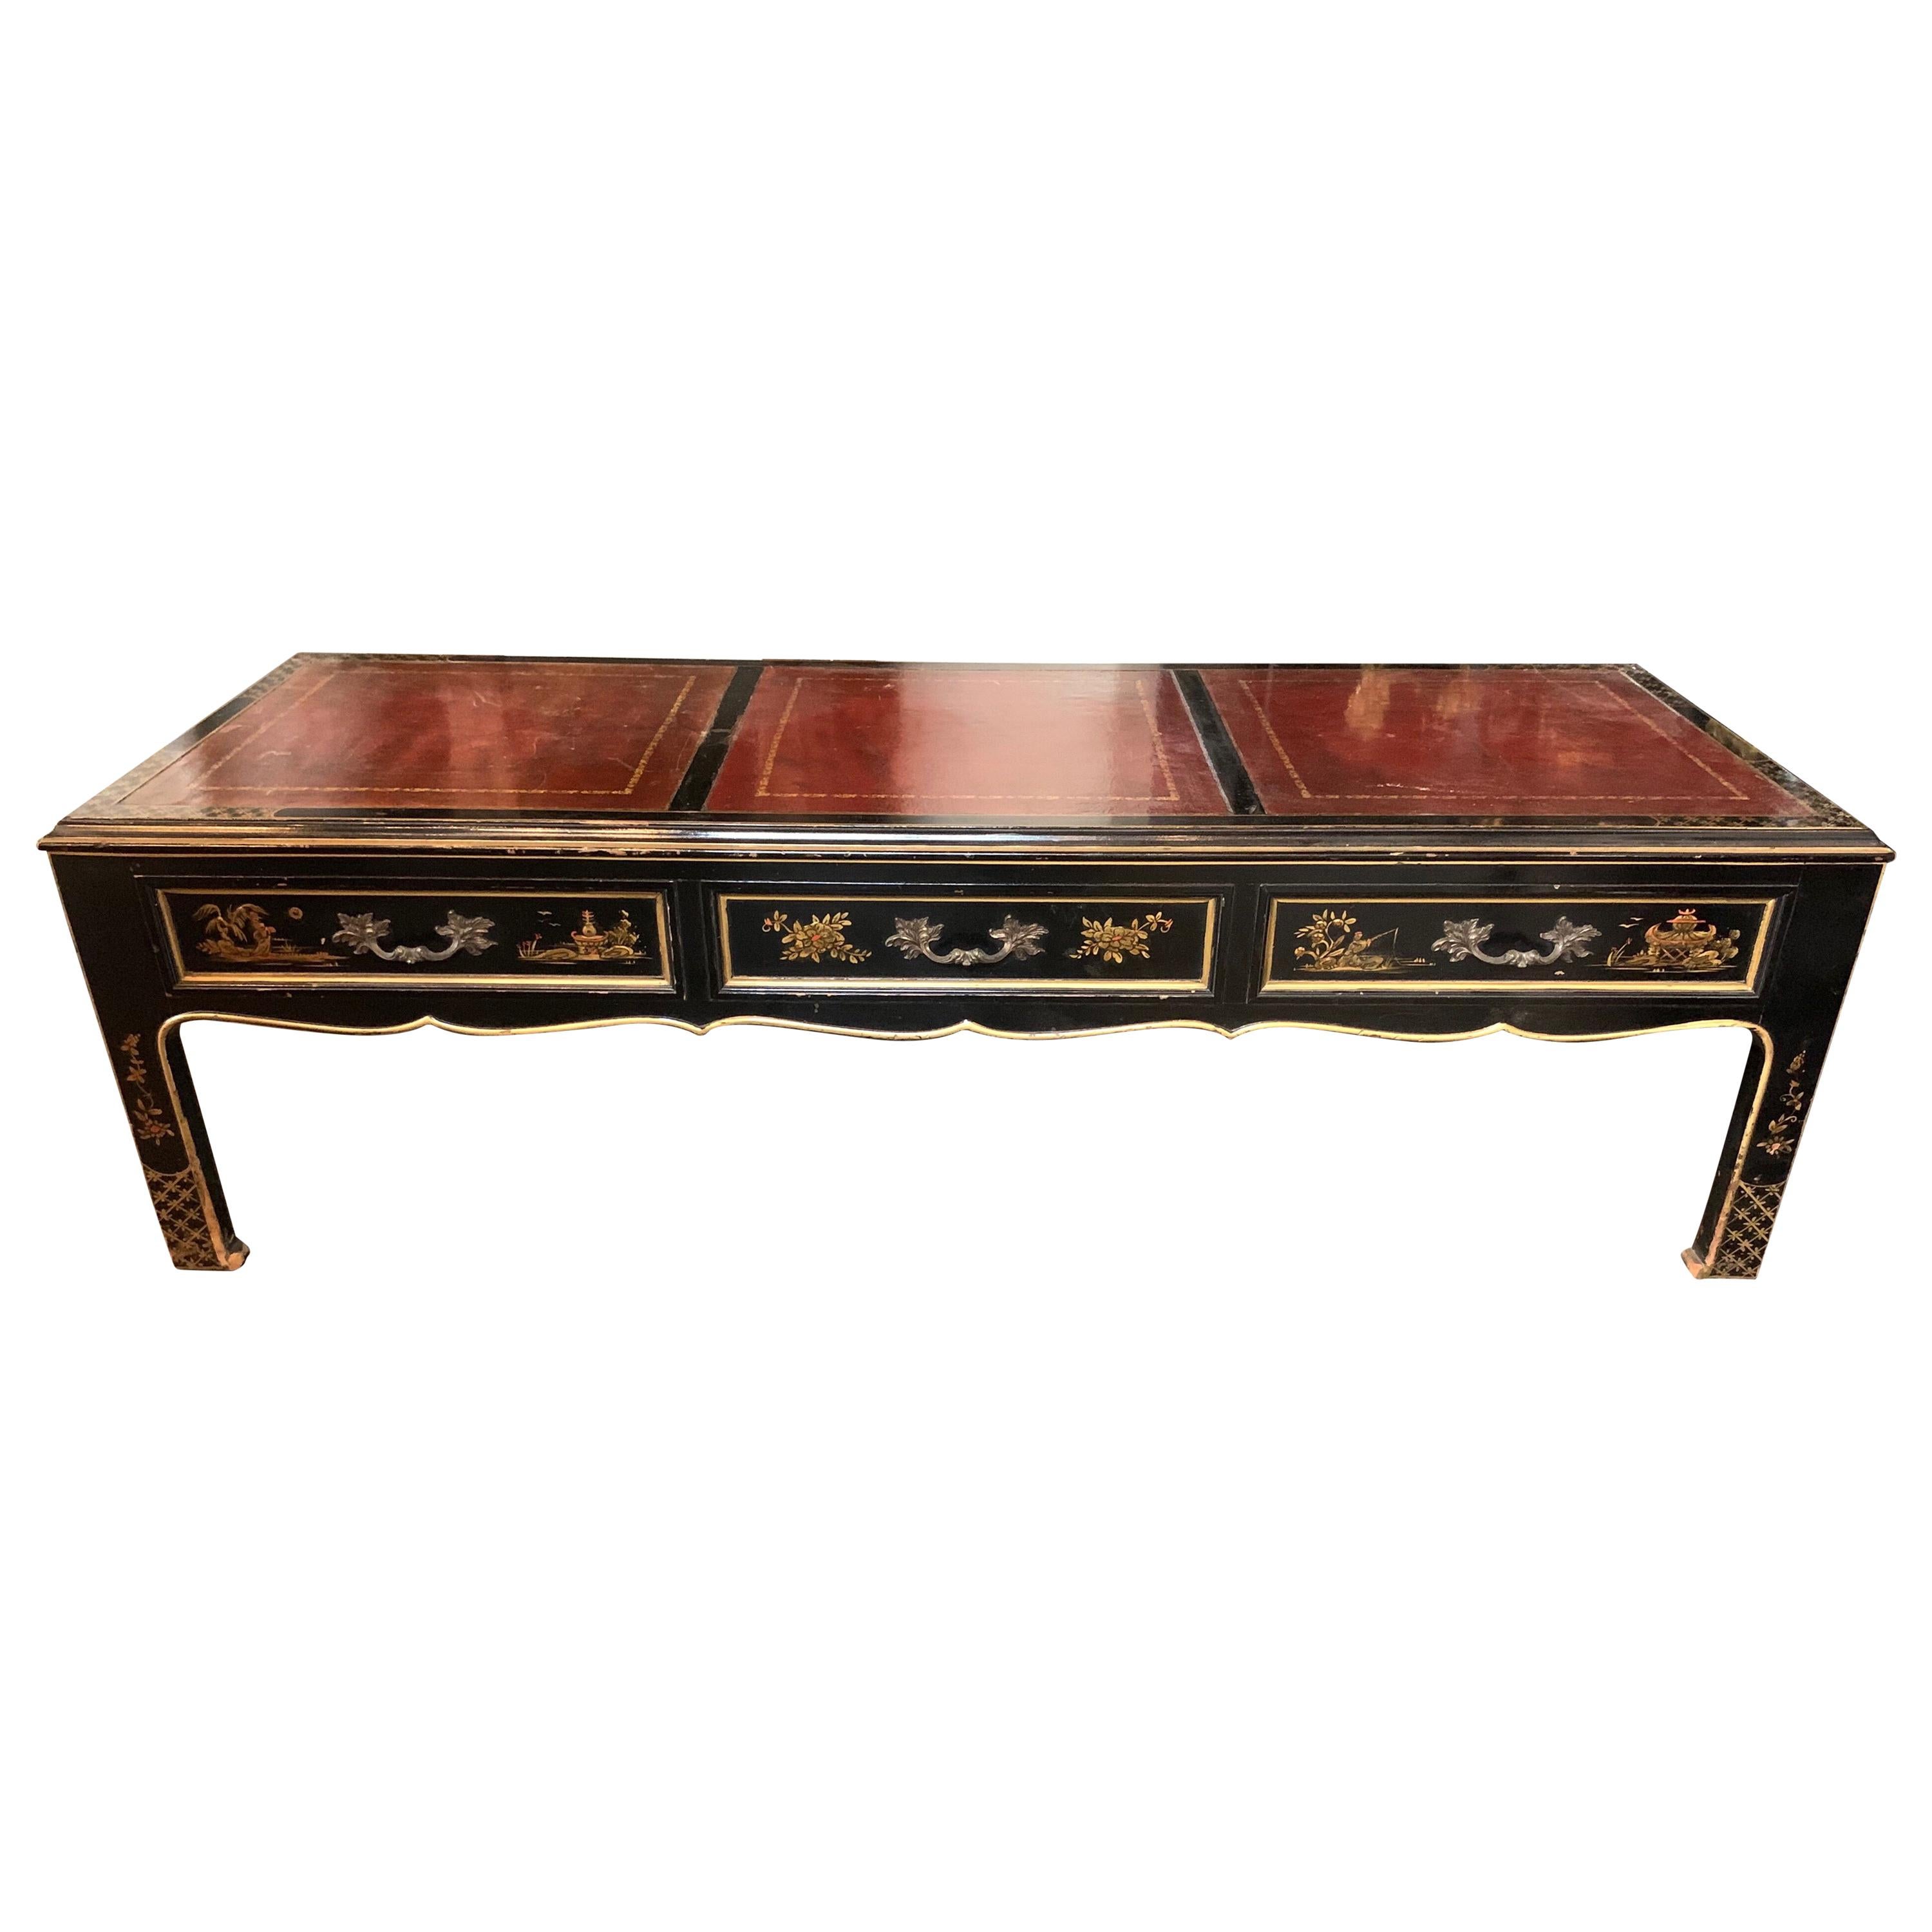 Early 20th Century English Chinoiserie Low Table